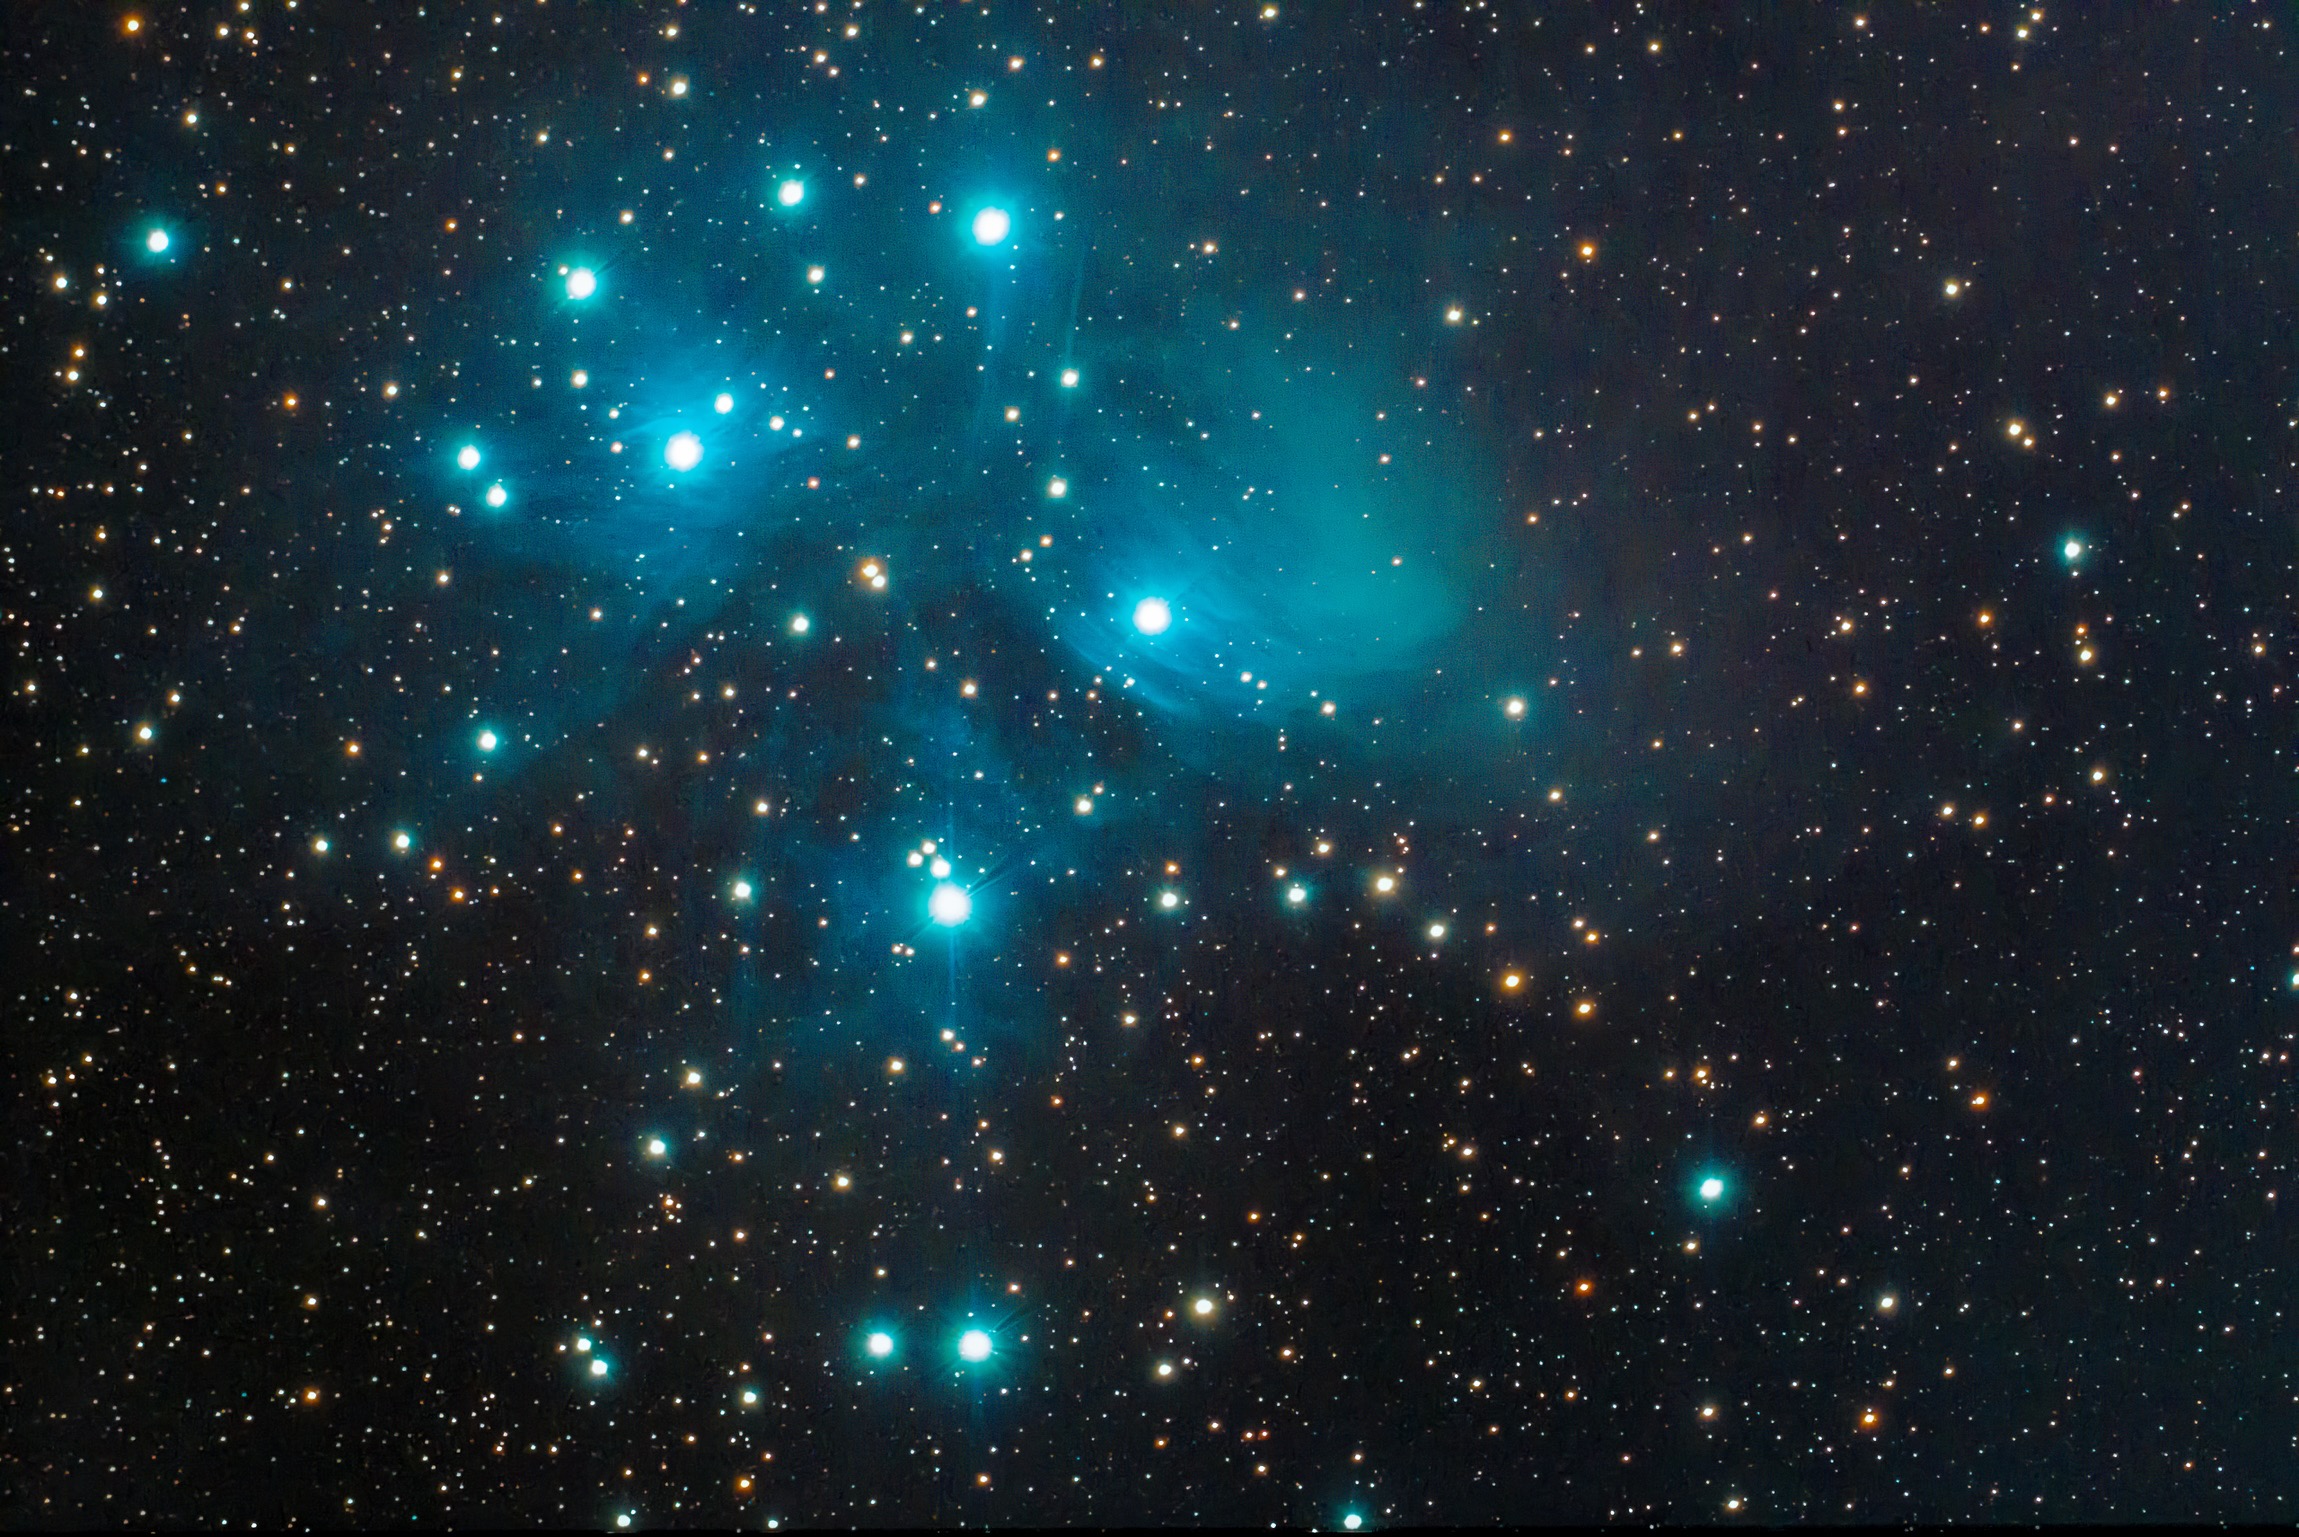 The Pleiades star cluster is also famously known as the Seven Sisters. Or, to some, it’s known as Messier 45 (M45) on the list of Messier objects. The Pleiades is visible from almost every part of the globe. It’s seen from as far north as the North Pole and farther south than the southernmost tip of South America. It looks like a tiny misty dipper of stars.